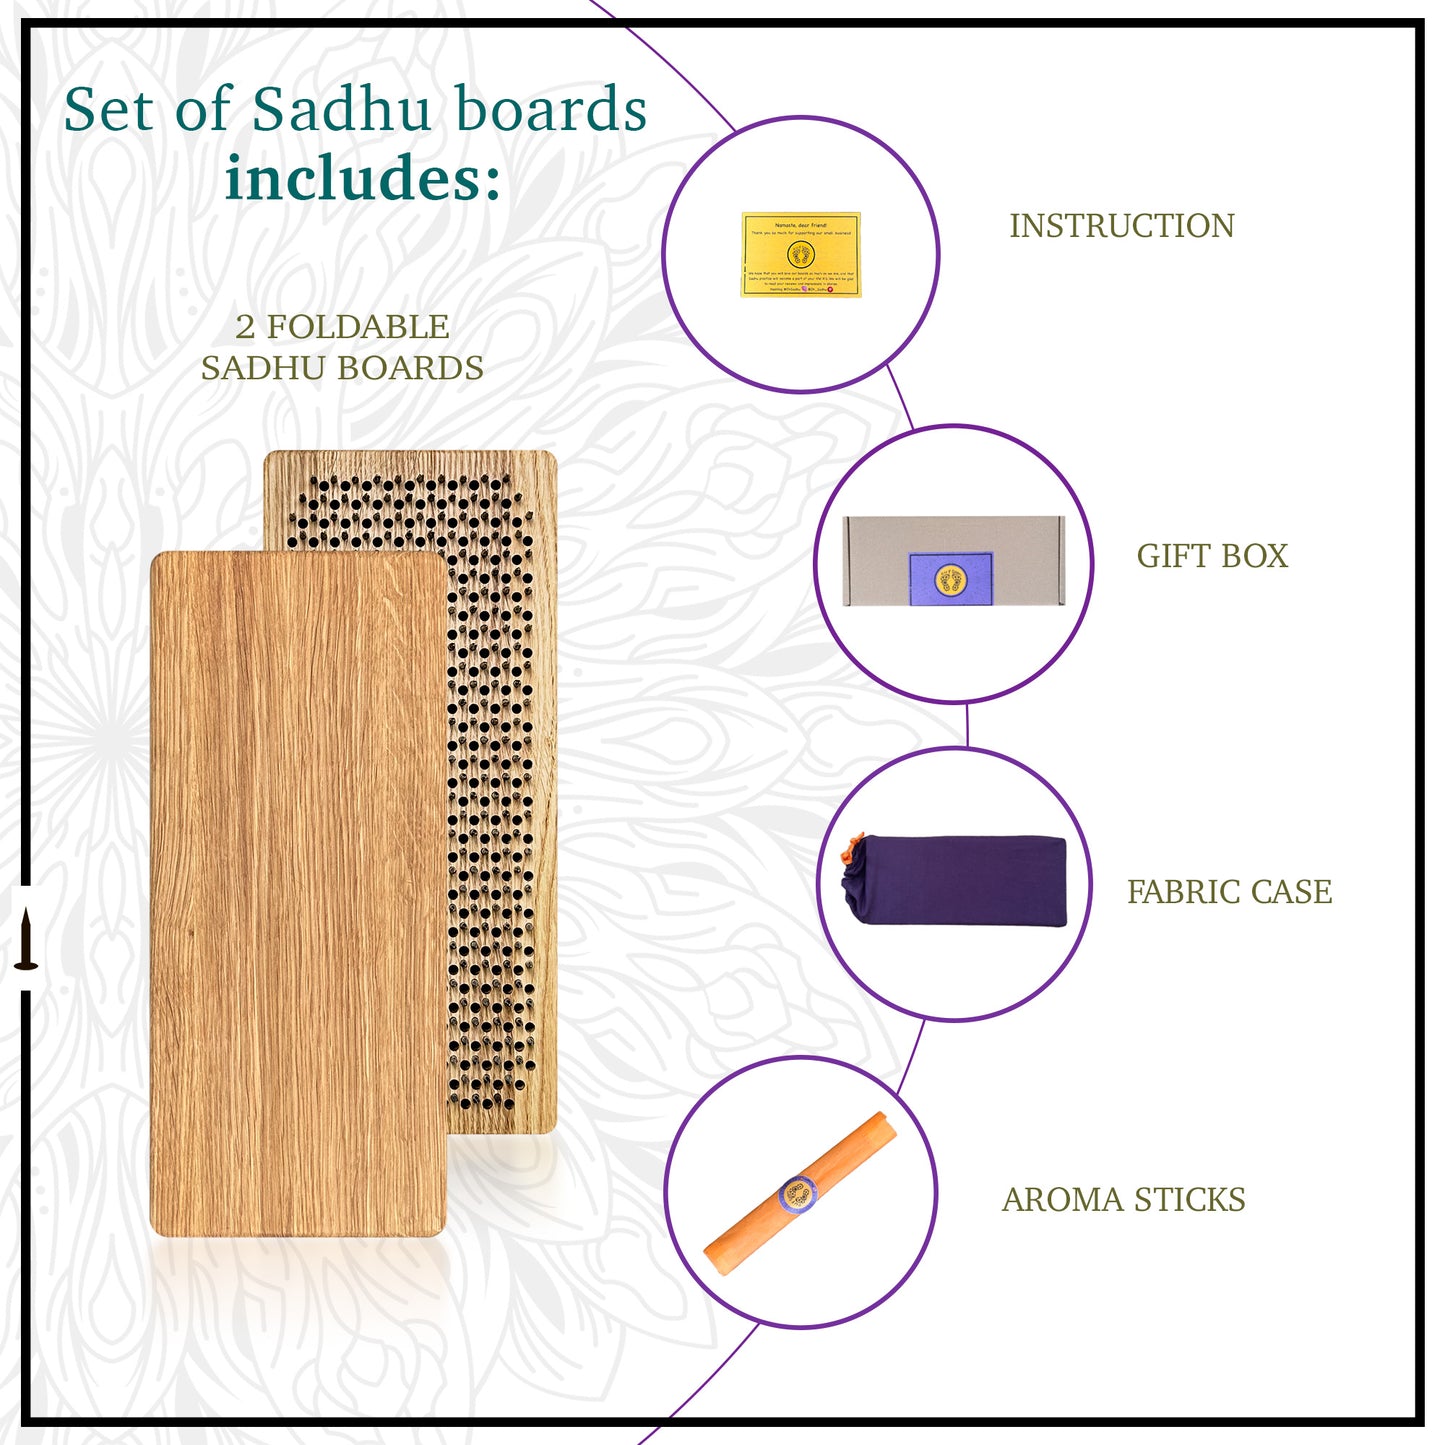 What is included in set of sadhu board oh! sadhu